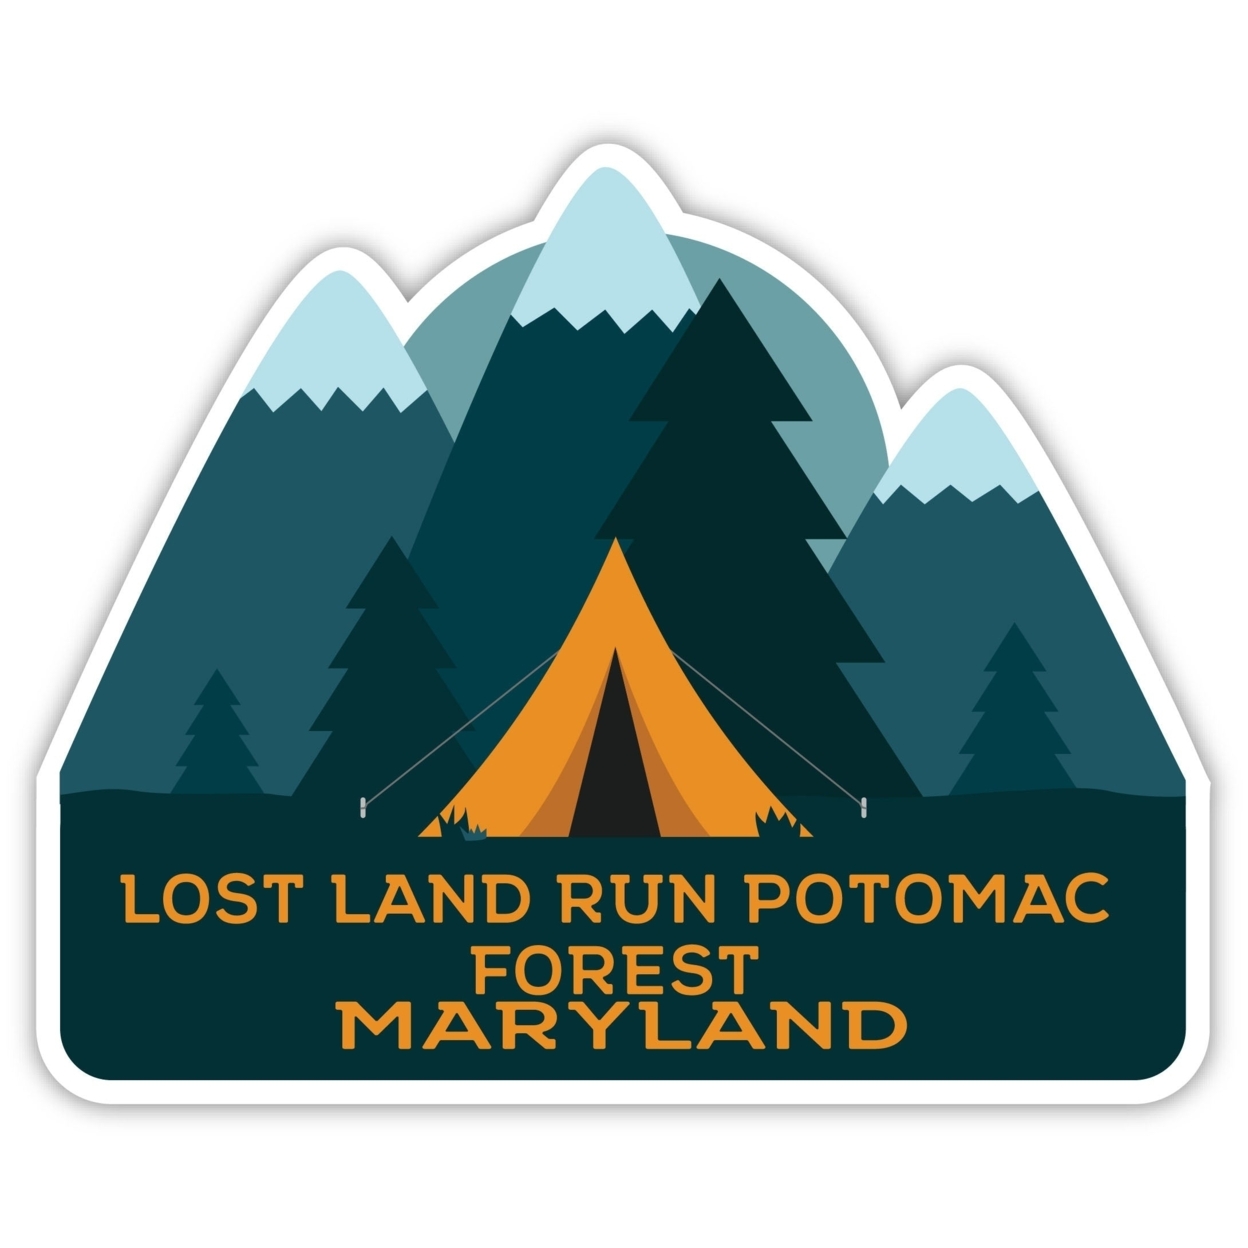 Lost Land Run Potomac Forest Maryland Souvenir Decorative Stickers (Choose Theme And Size) - 4-Inch, Tent